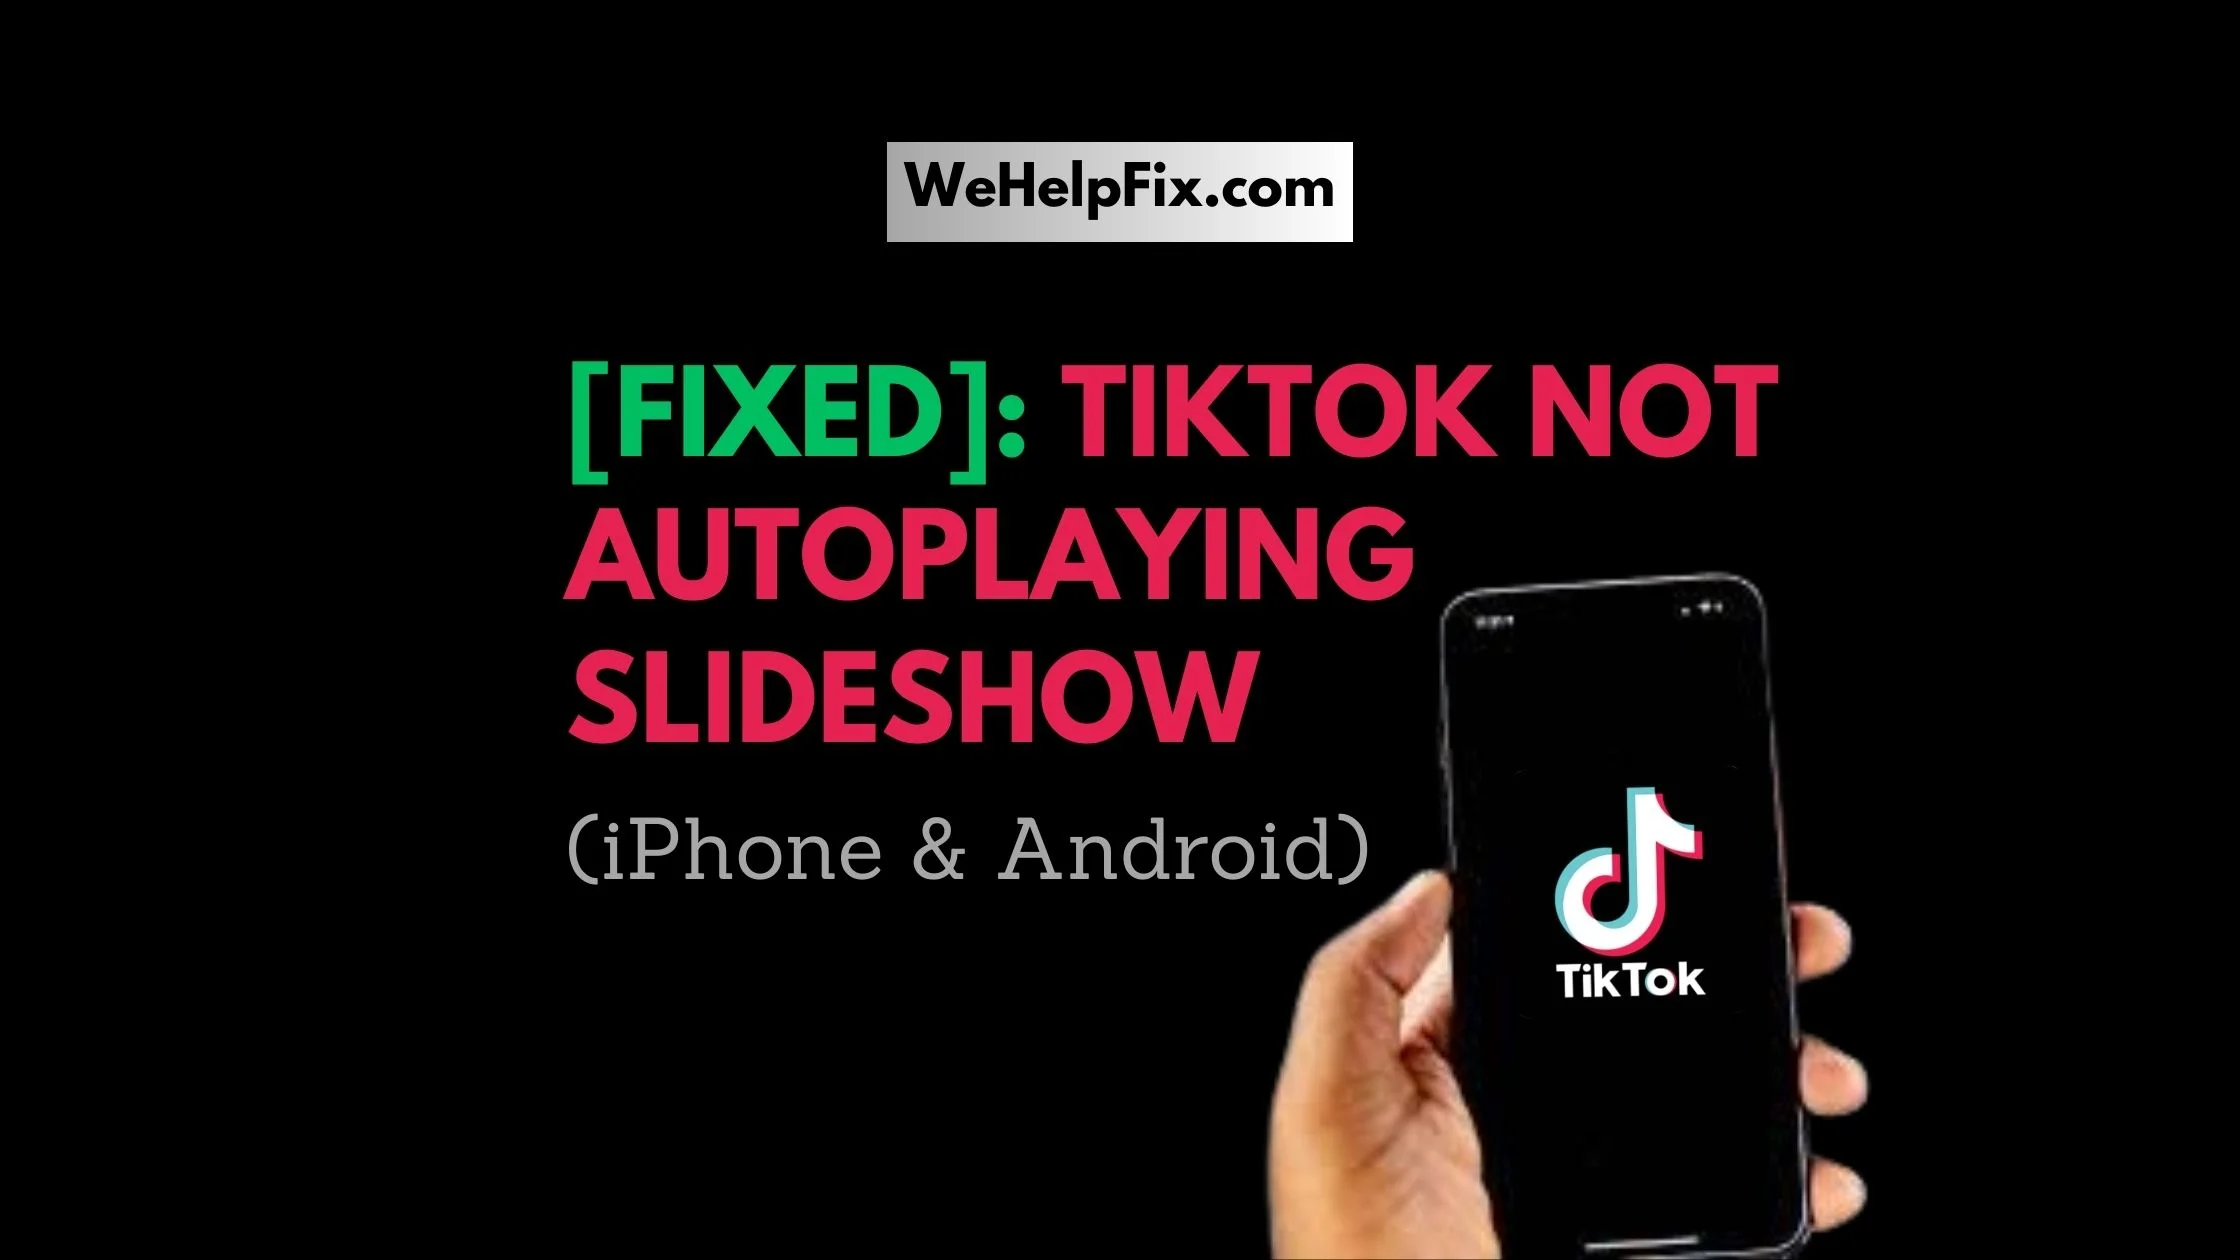 [Fixed]: TikTok Not Autoplaying Slideshow (iPhone & Android)